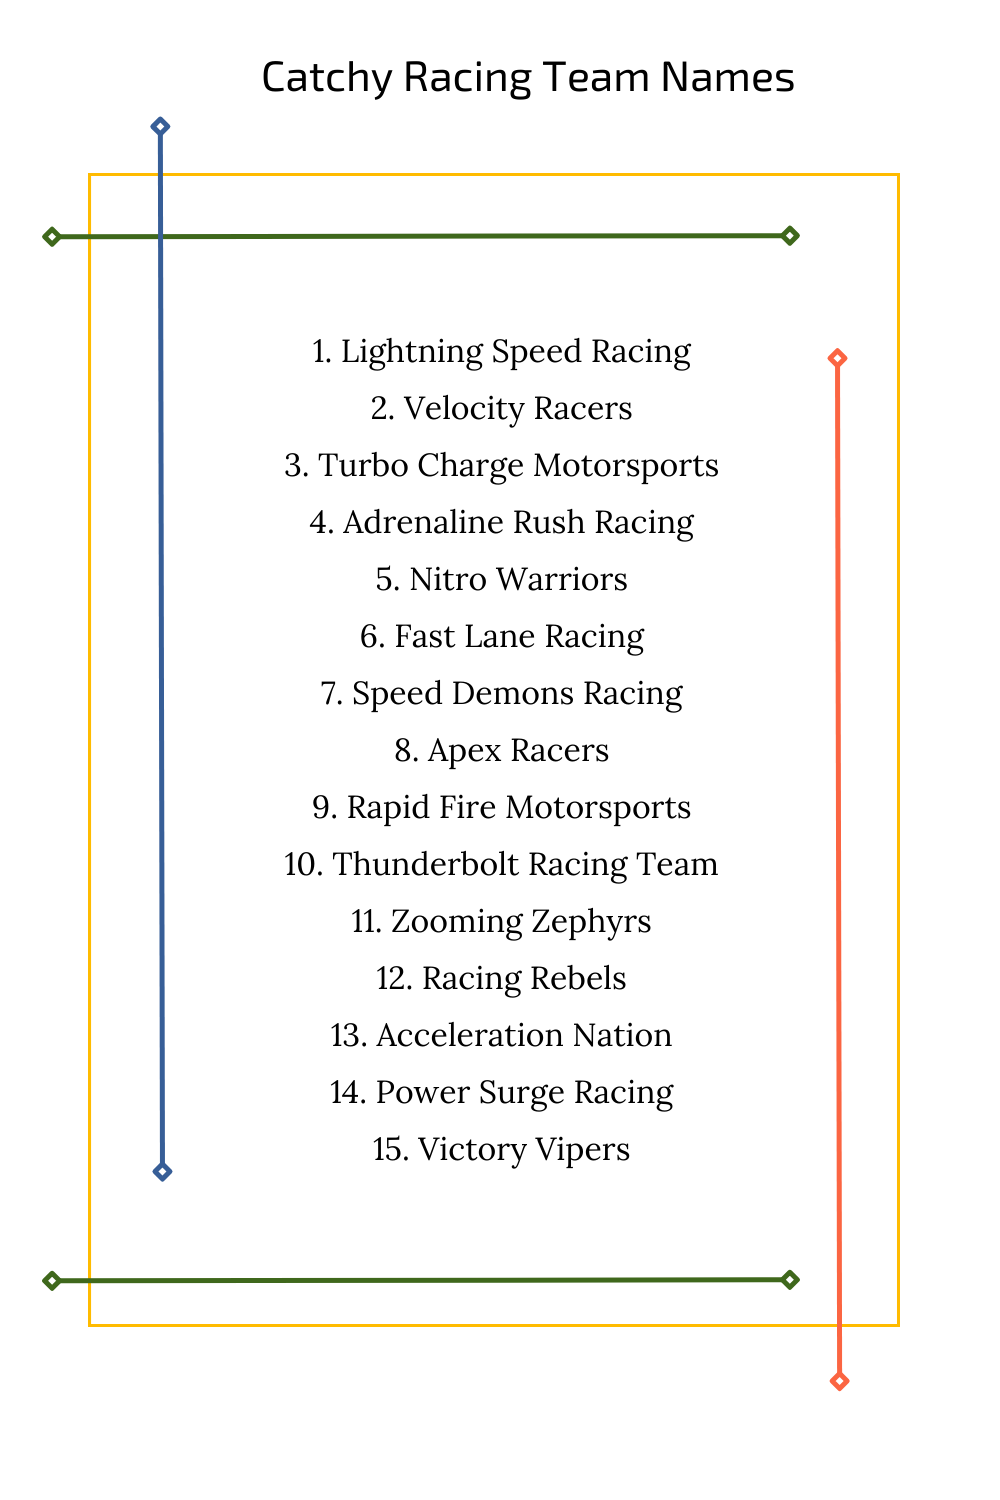 Catchy Racing Team Names